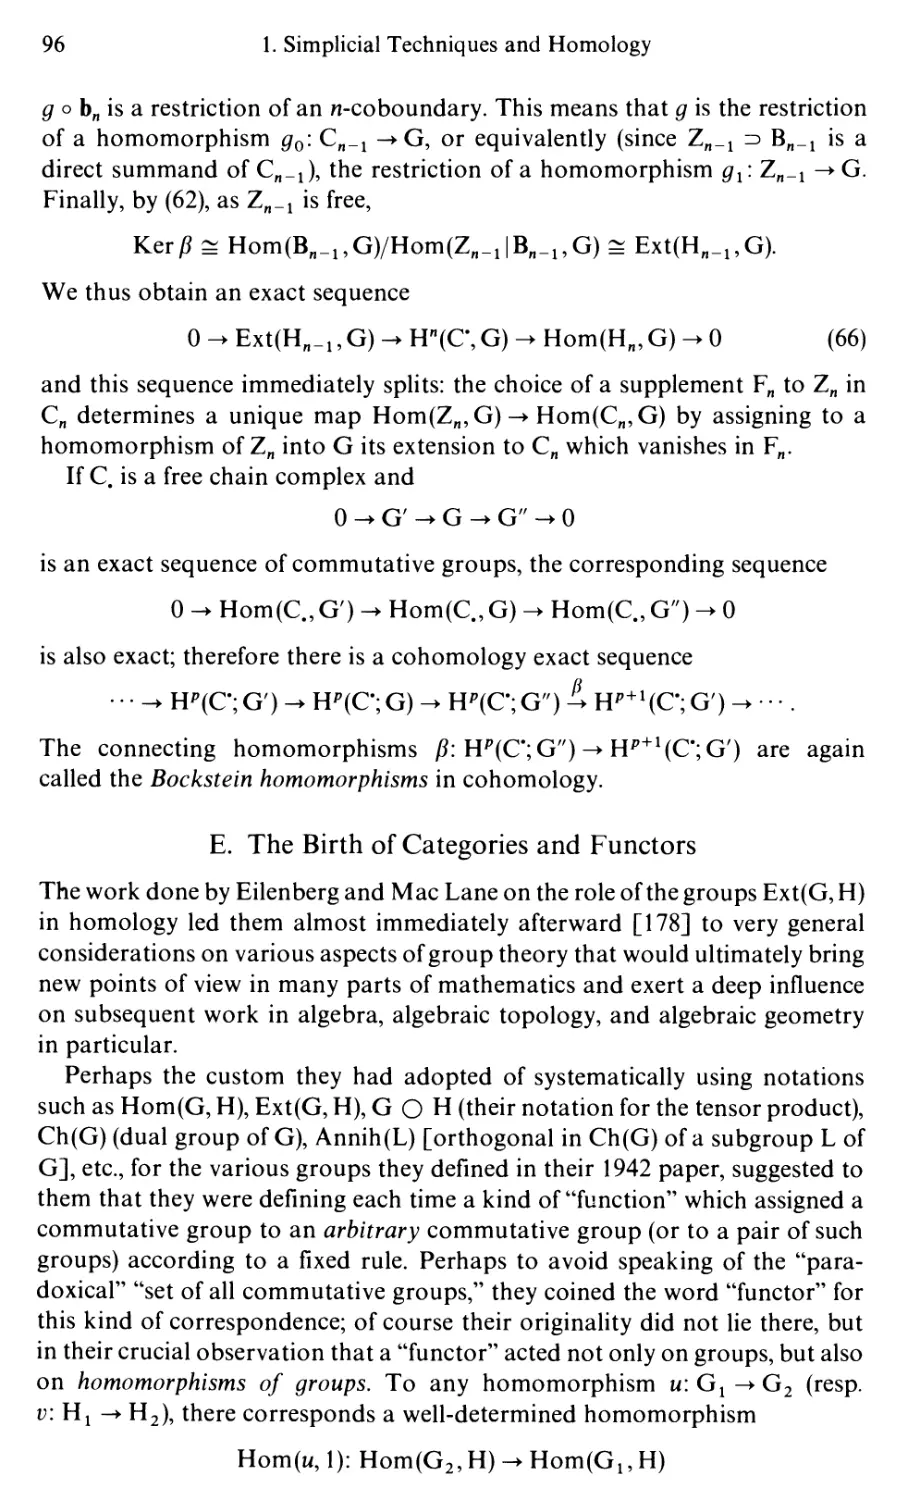 E. The Birth of Categories and Functors